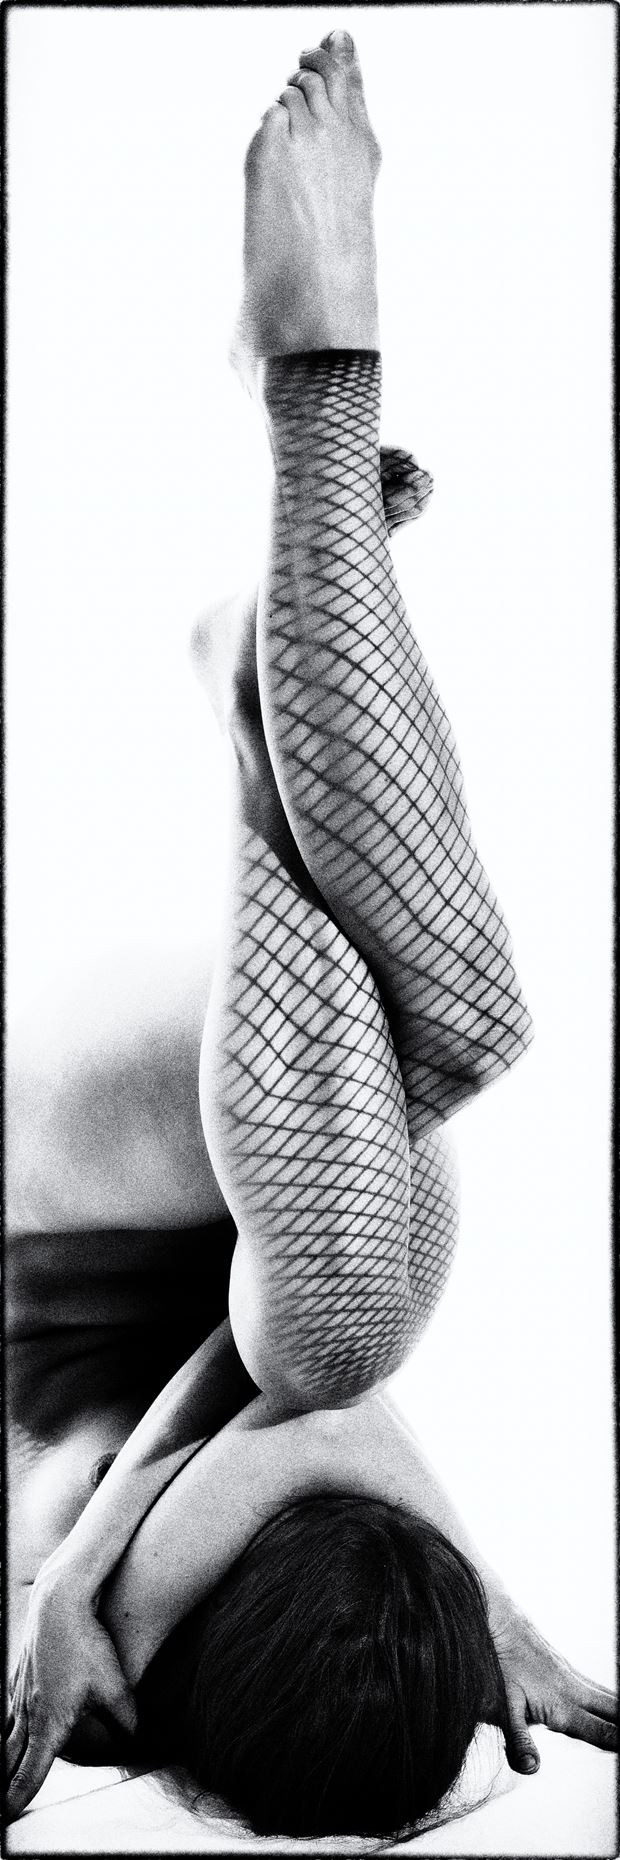 sp 3c0 artistic nude photo by photographer servophoto